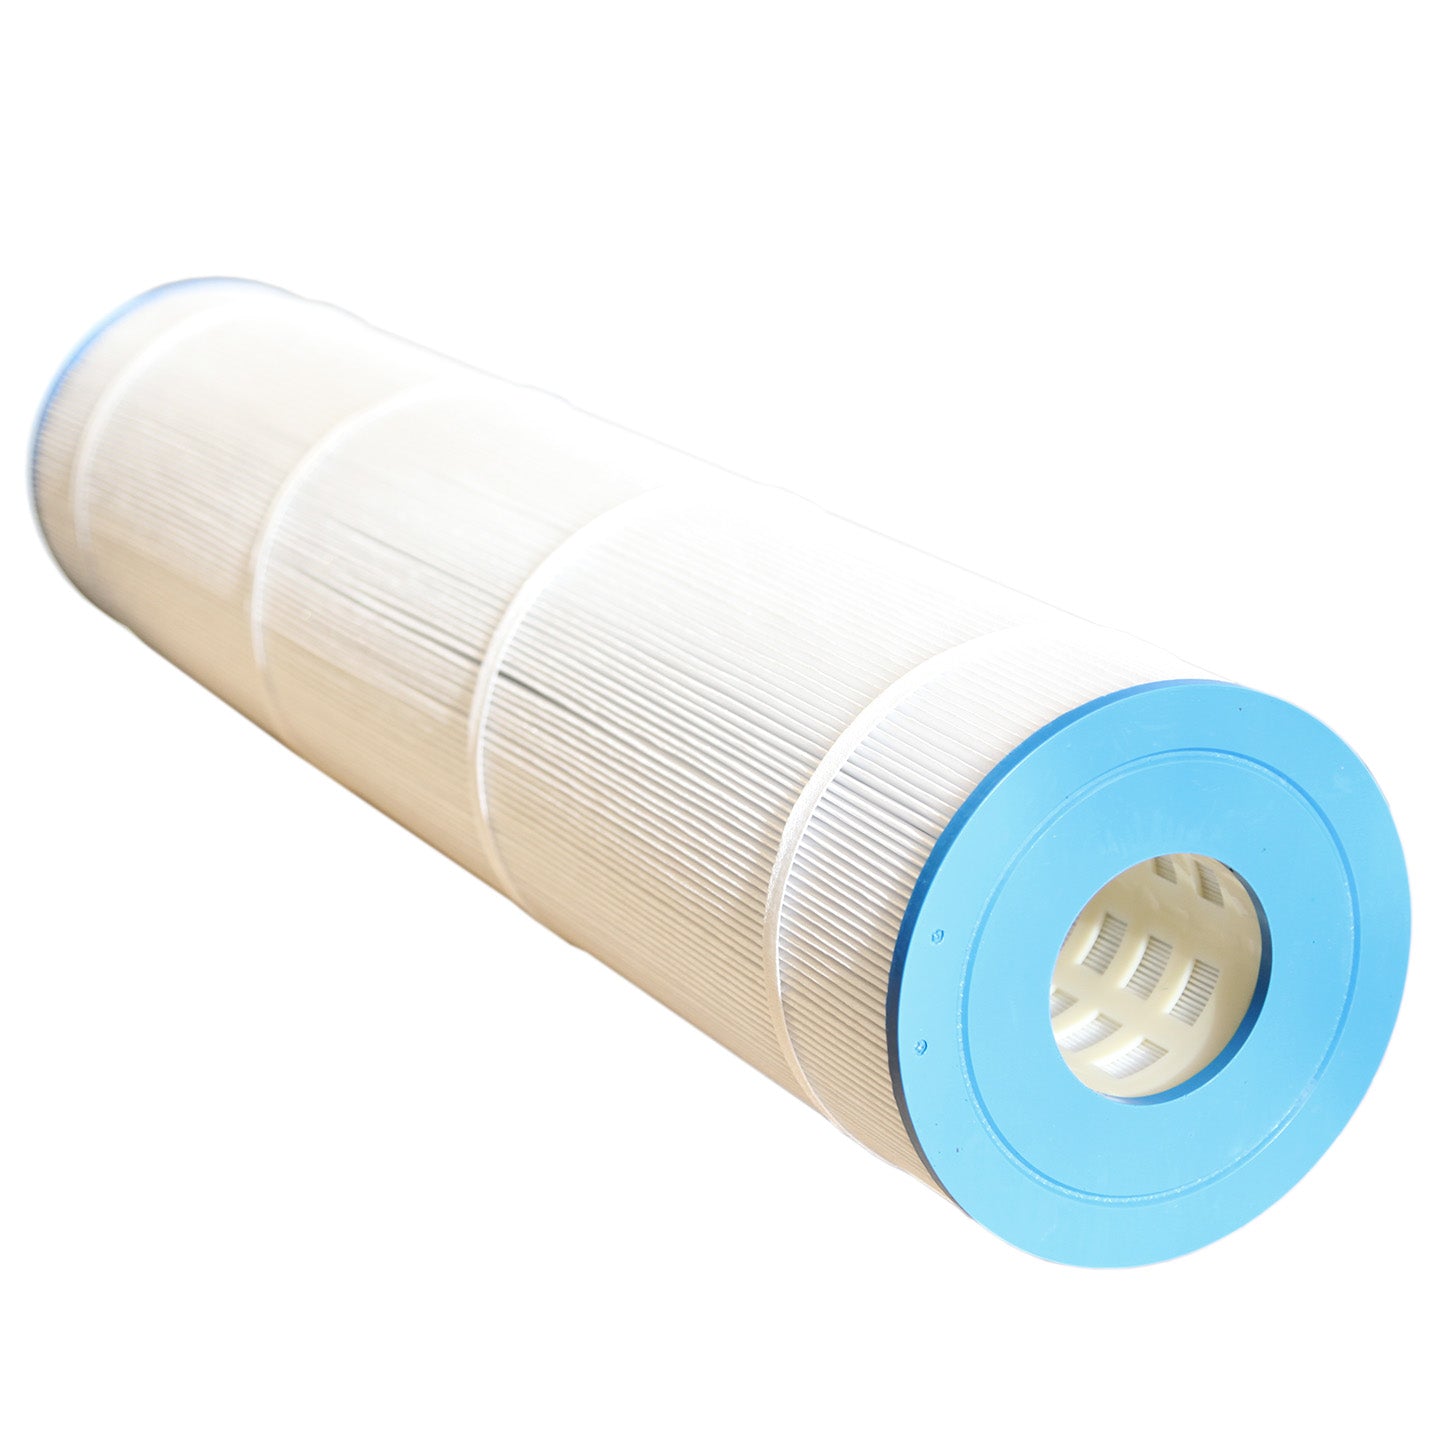 Tier1 Brand Replacement Pool and Spa Filter for 817-0143, 178585 & R173578